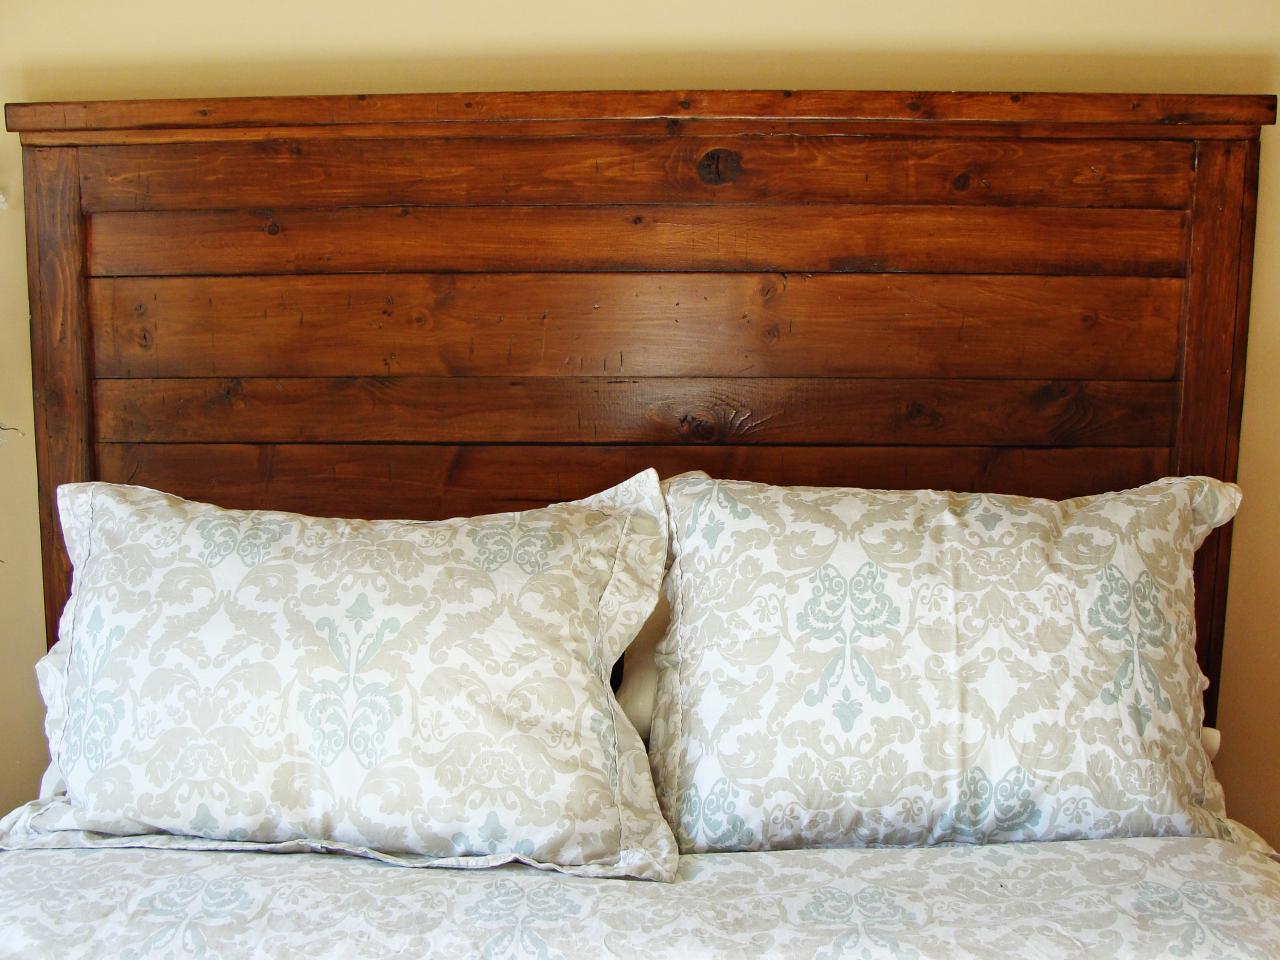 How To Build A Rustic Wood Headboard, Large Wooden Headboards